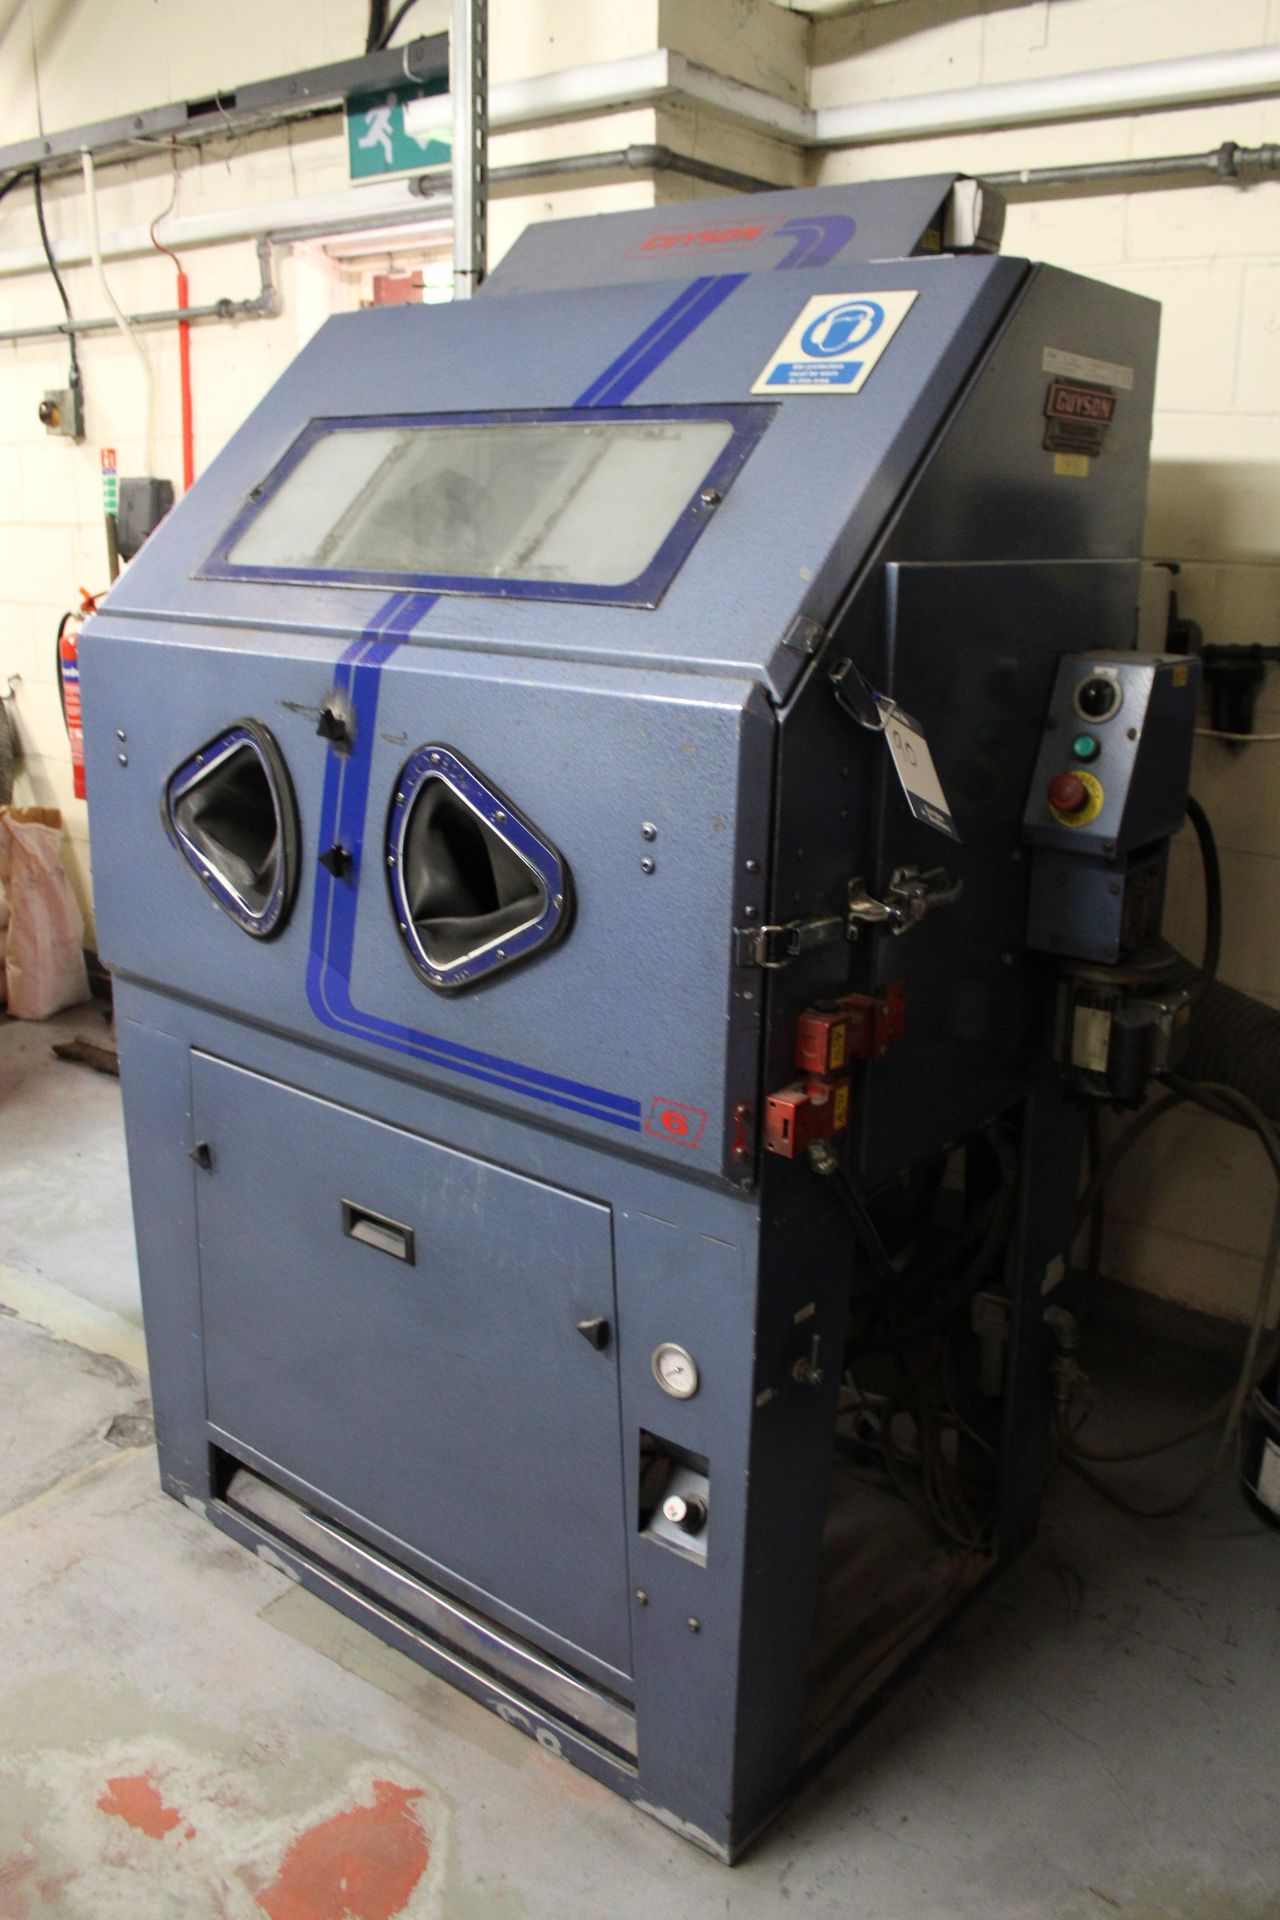 Guyson Euro 6 SF Plus System shot blast cabinet, Serial No. 802713 (2001), size: 1,070mm x 778mm x - Image 2 of 7